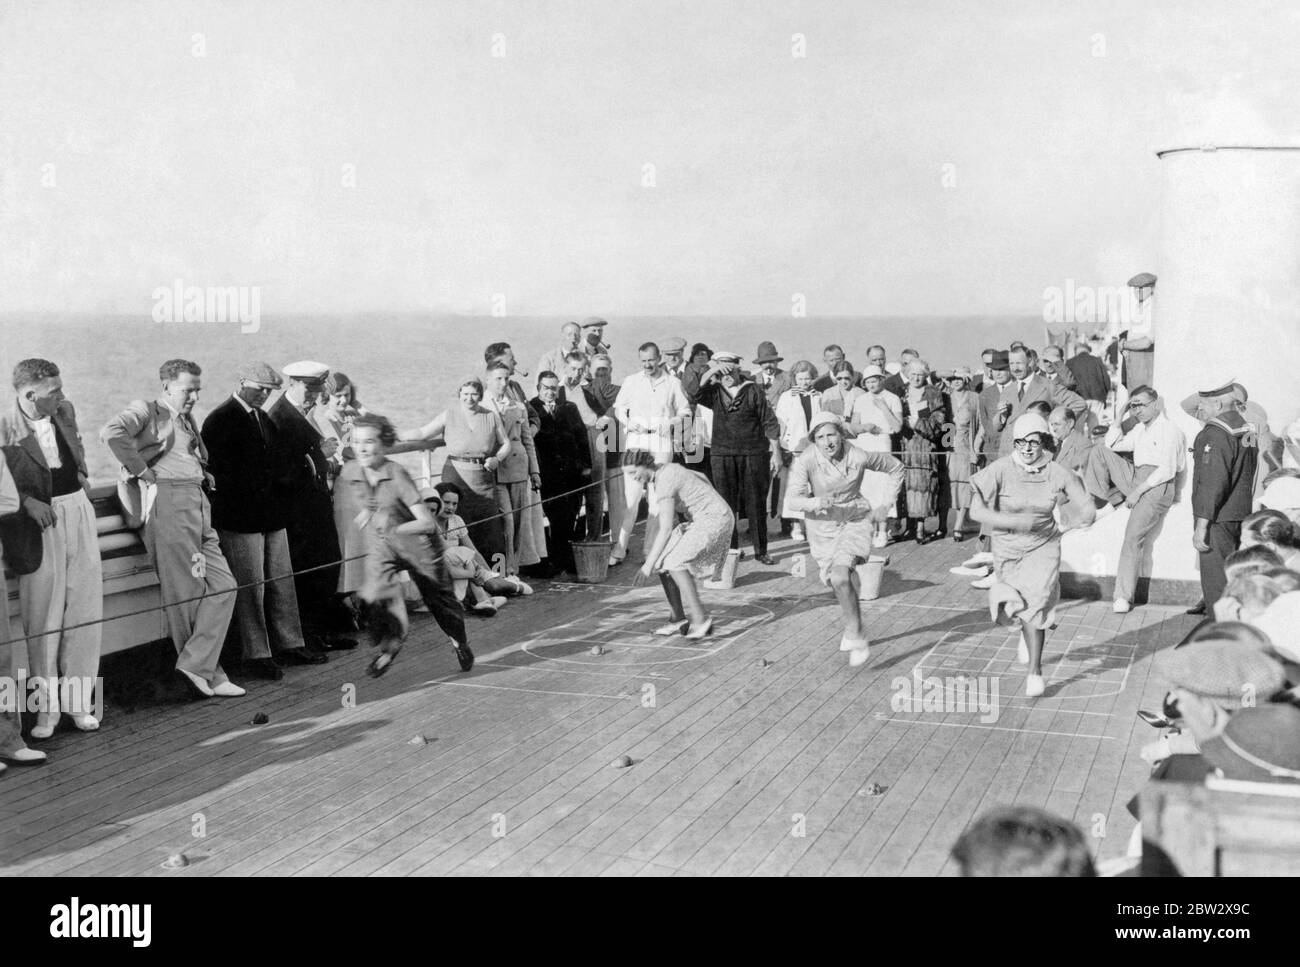 Deck games on board an ocean liner in the 1930s. Here a running contest involving female passengers draws a sizeable audience. Stock Photo